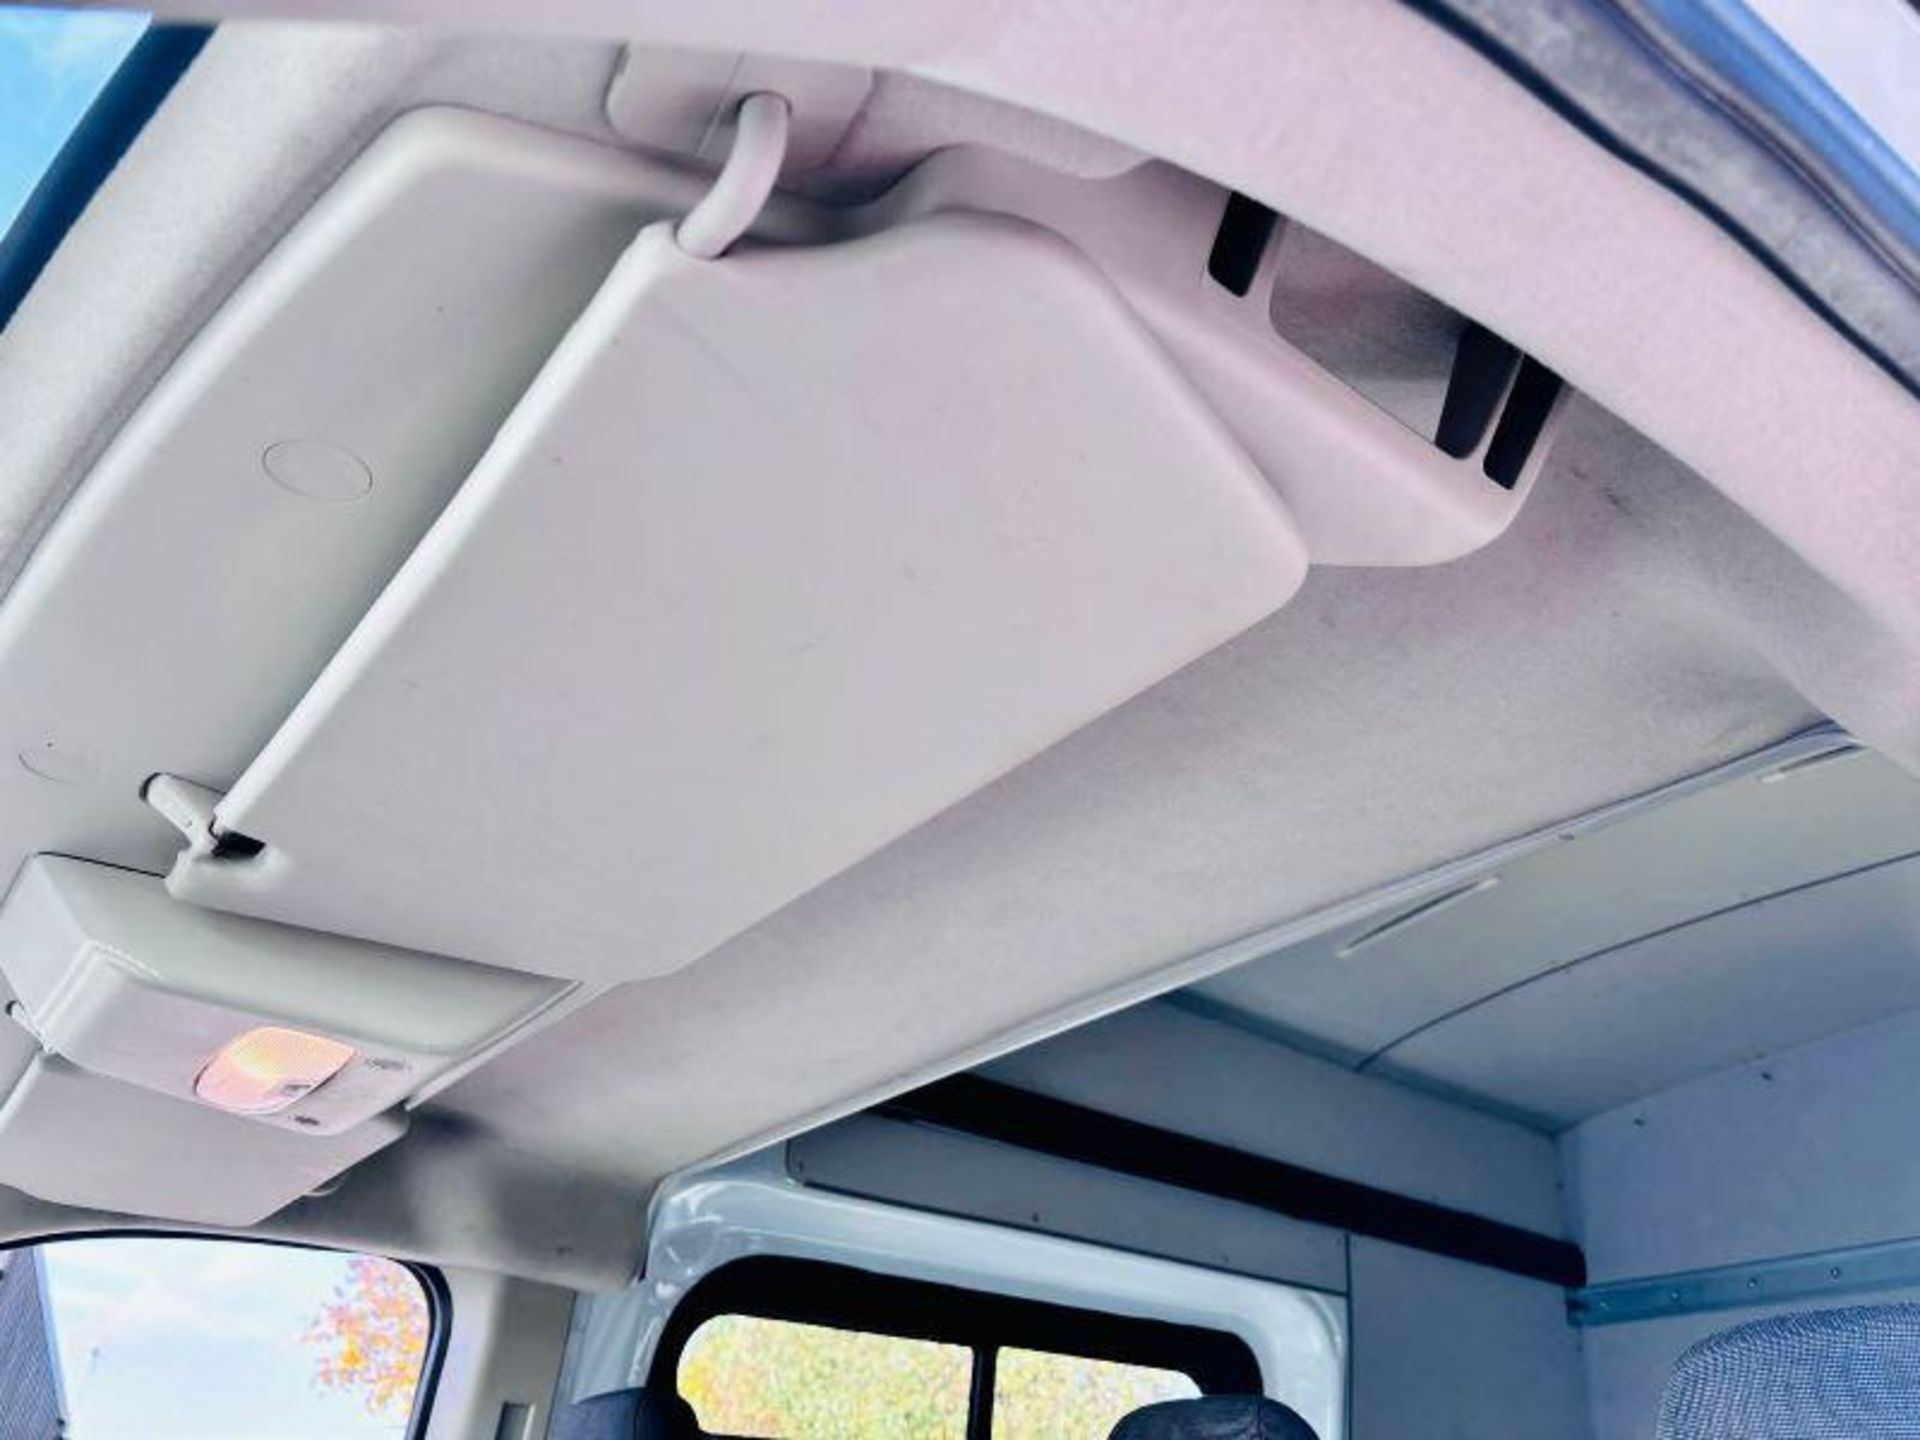 2019 FORD TRANSIT 350 CREW VAN - BLUETOOTH - HANDS FREE - USB POINT. - Image 9 of 18